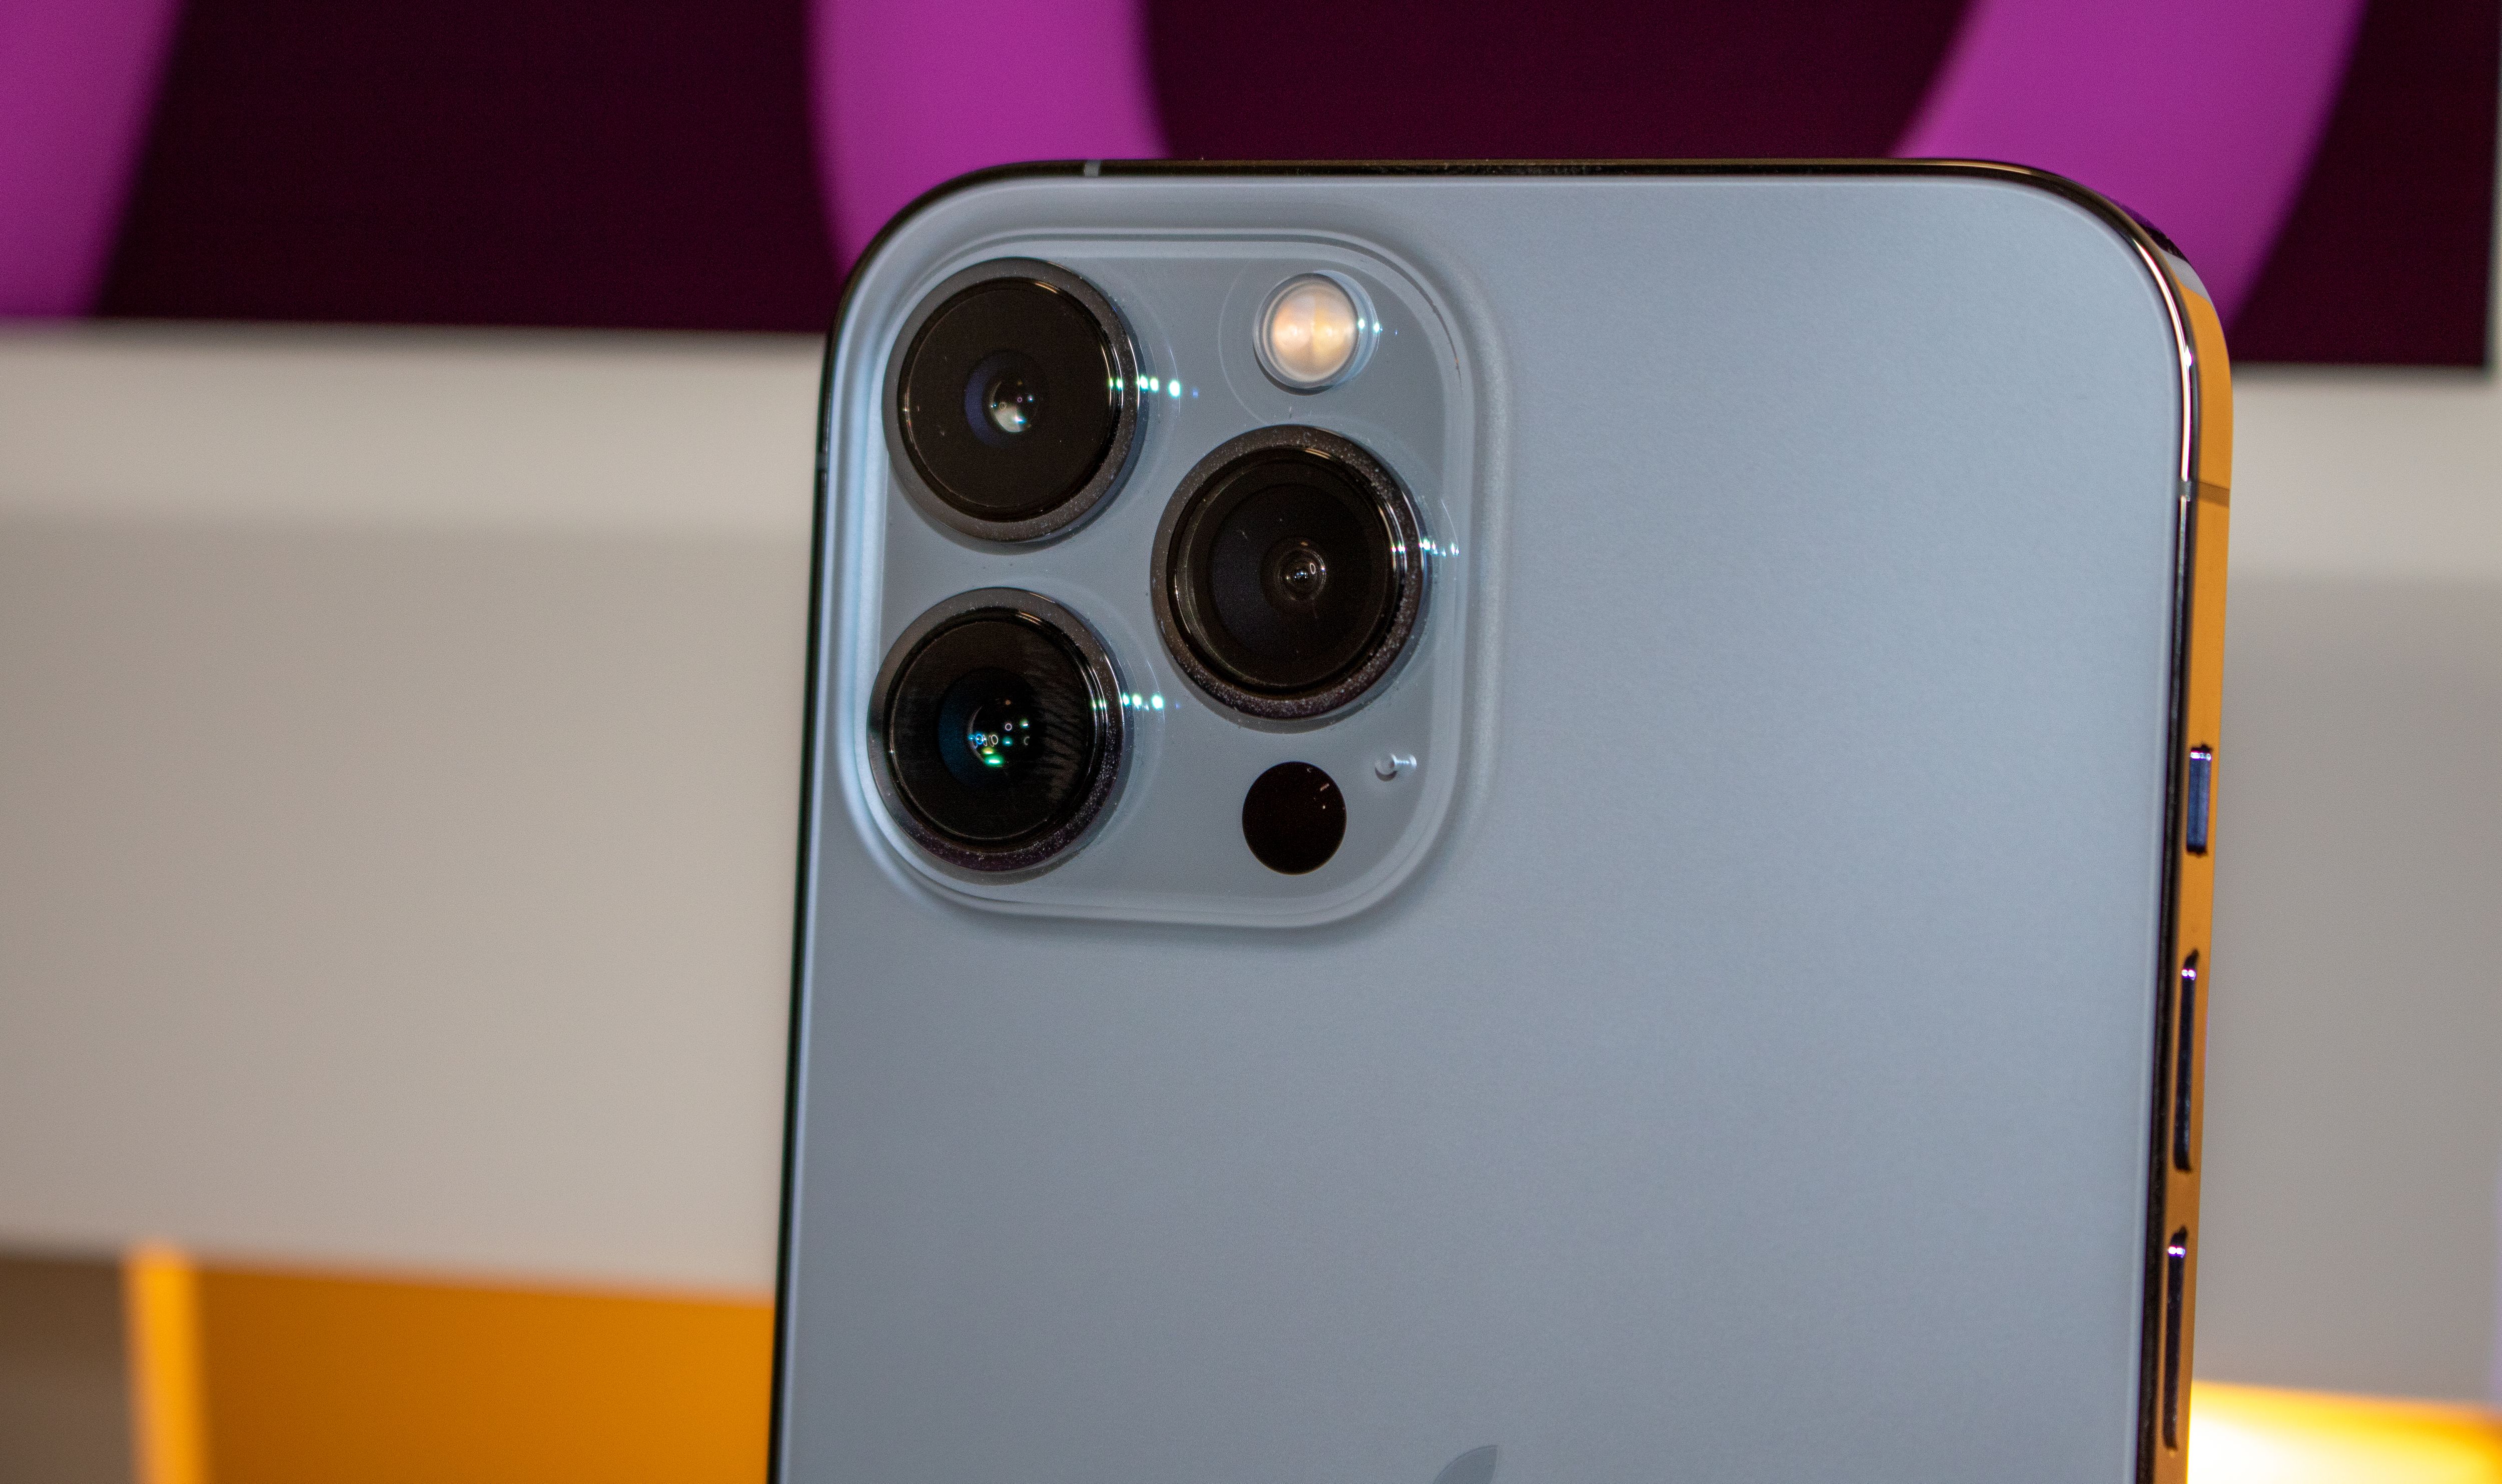 I Tested the Apple iPhone 13 Pro. The Camera Quality Is Ridiculous.